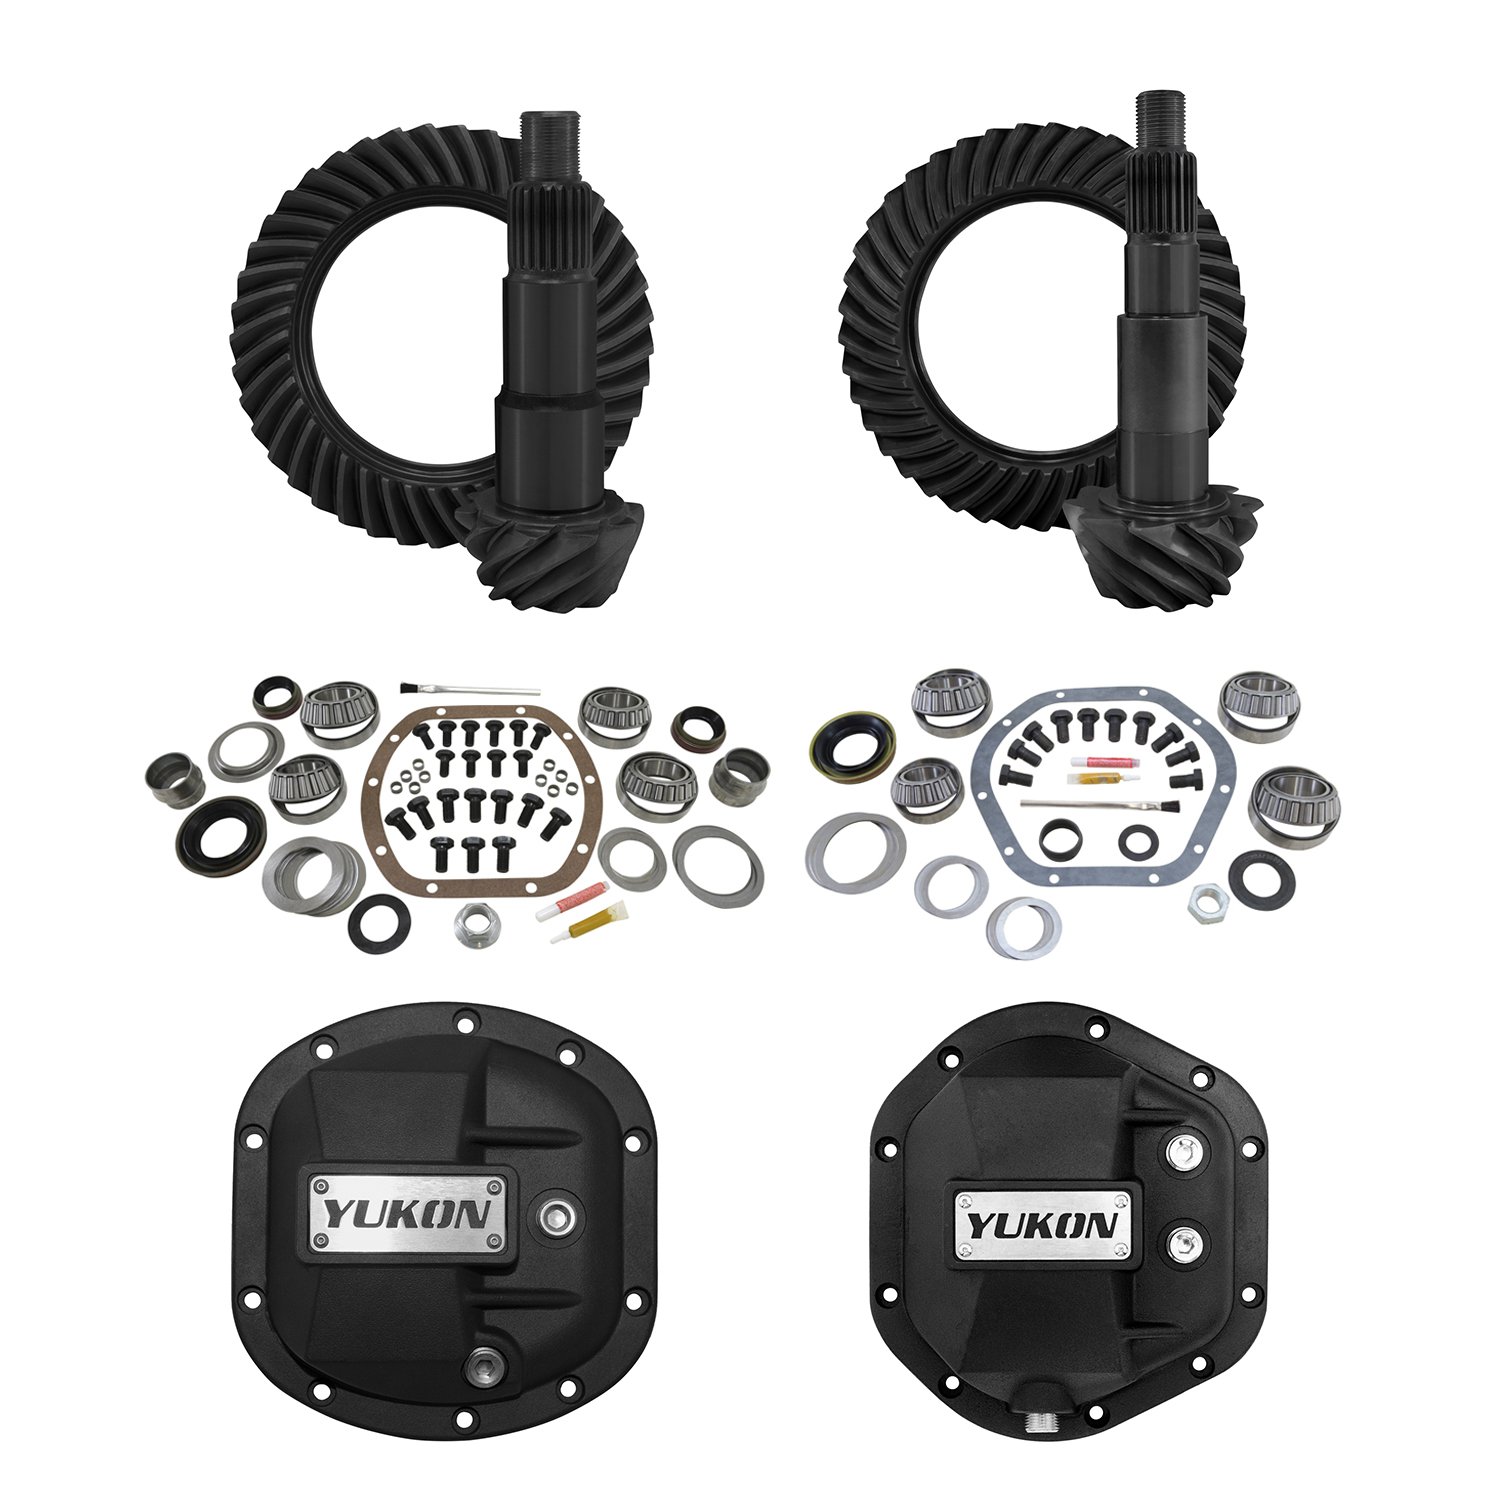 Stage 2 Jeep Jk Re-Gear Kit, W/Diff Covers For Dana 30/44, 4.56 Ratio